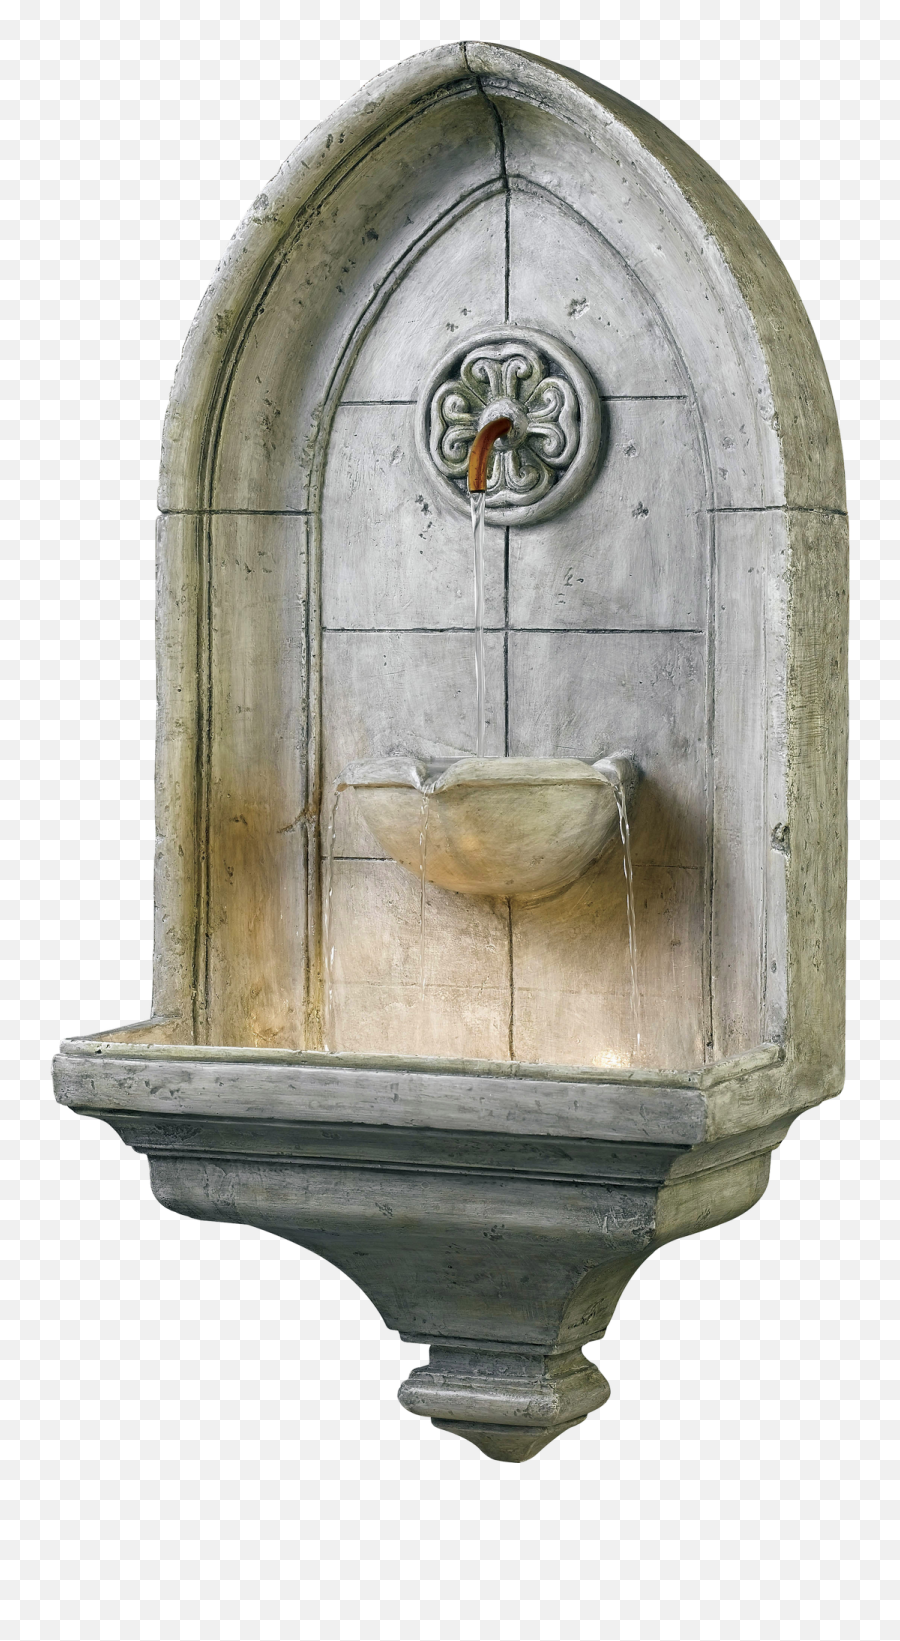 Download Fountain Png Image For Free - Fountain,Fountain Png